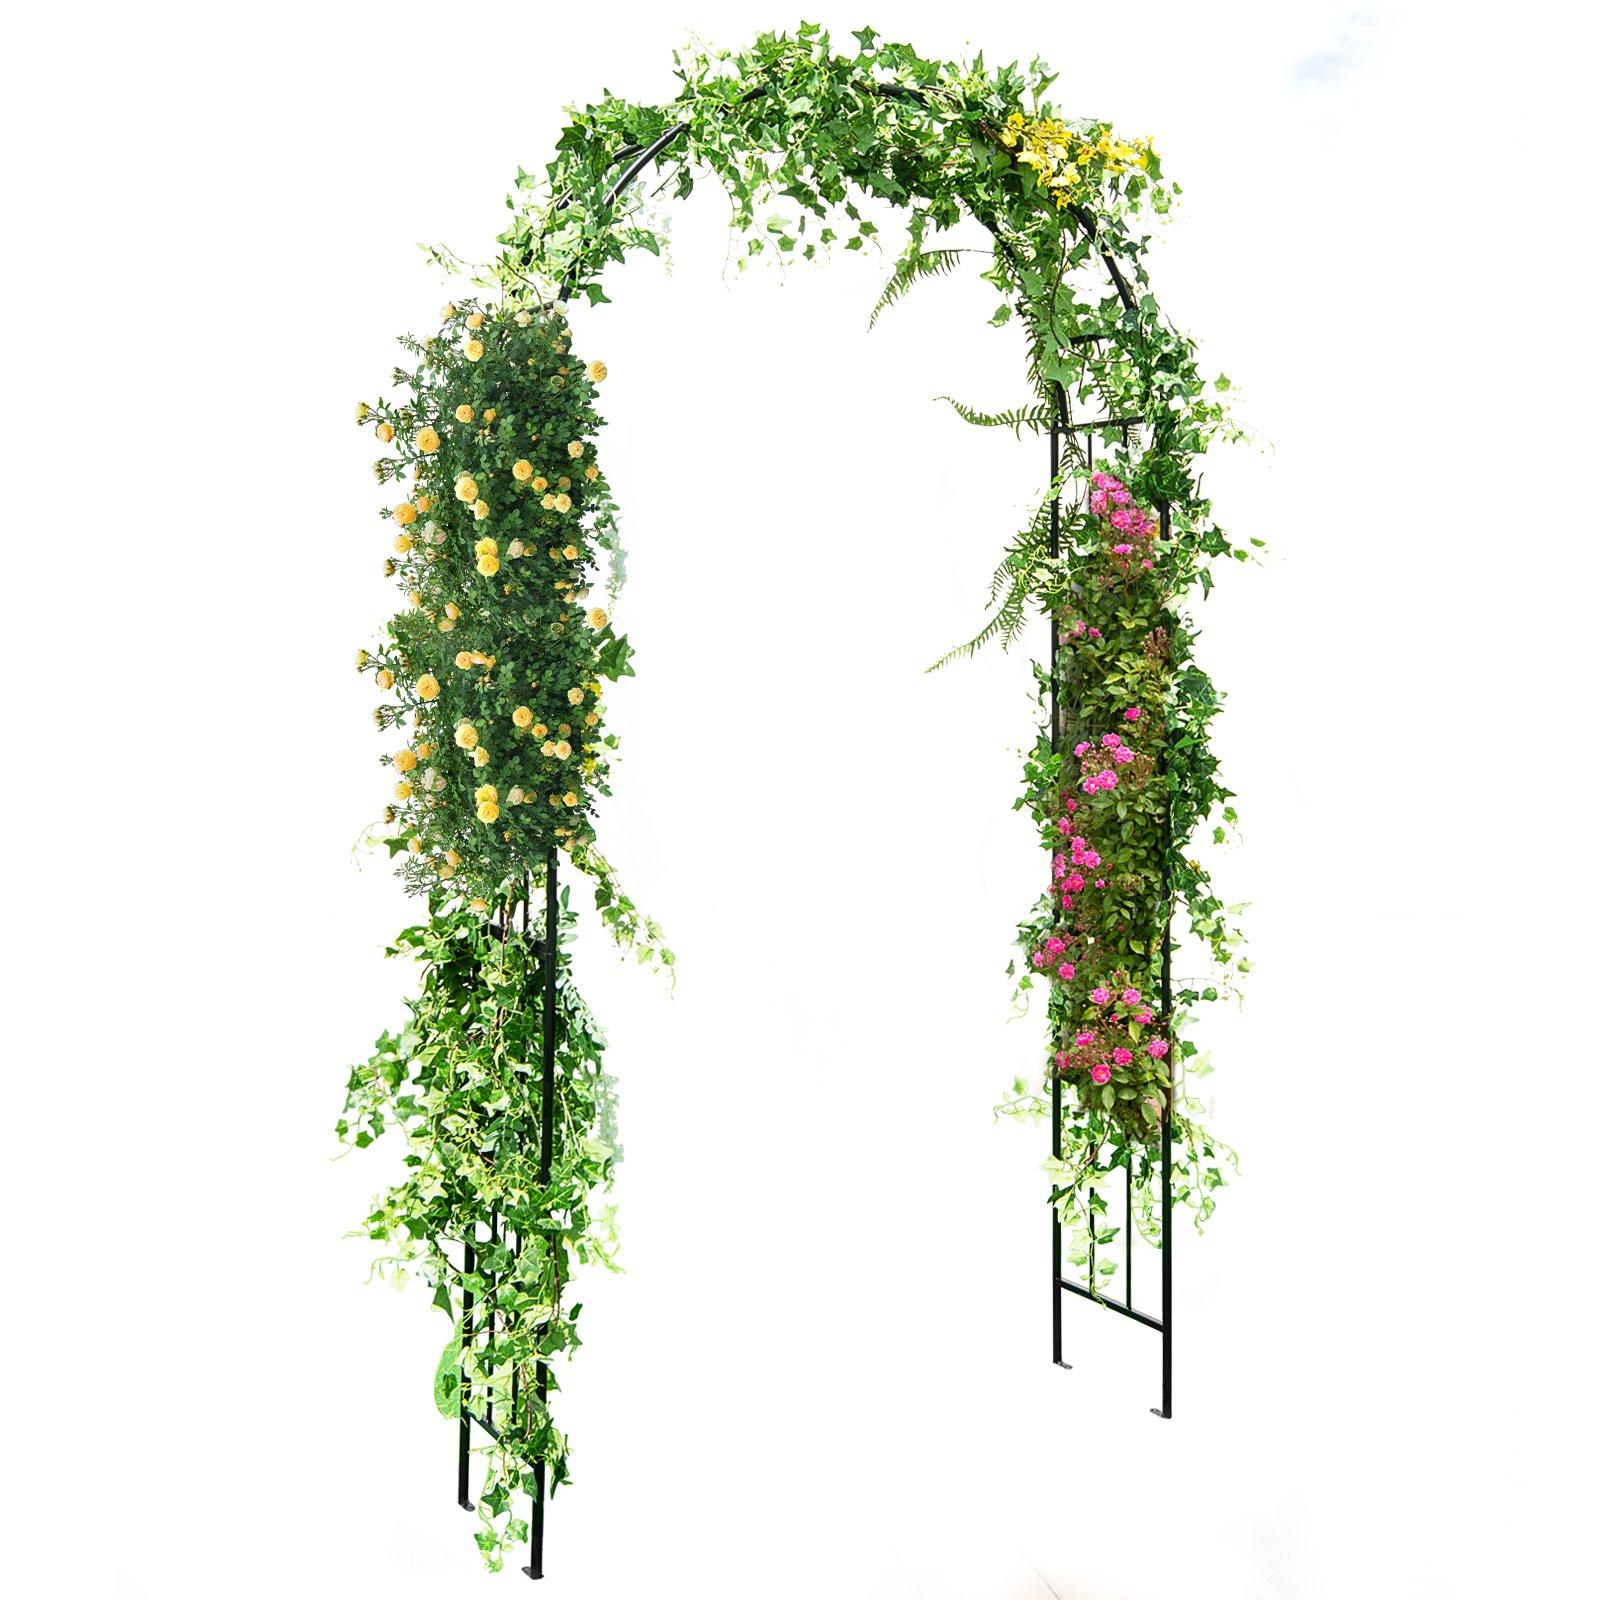 2.3M Garden Arch Heavy Duty Metal Roses Vines Climbing Plants Support Archway